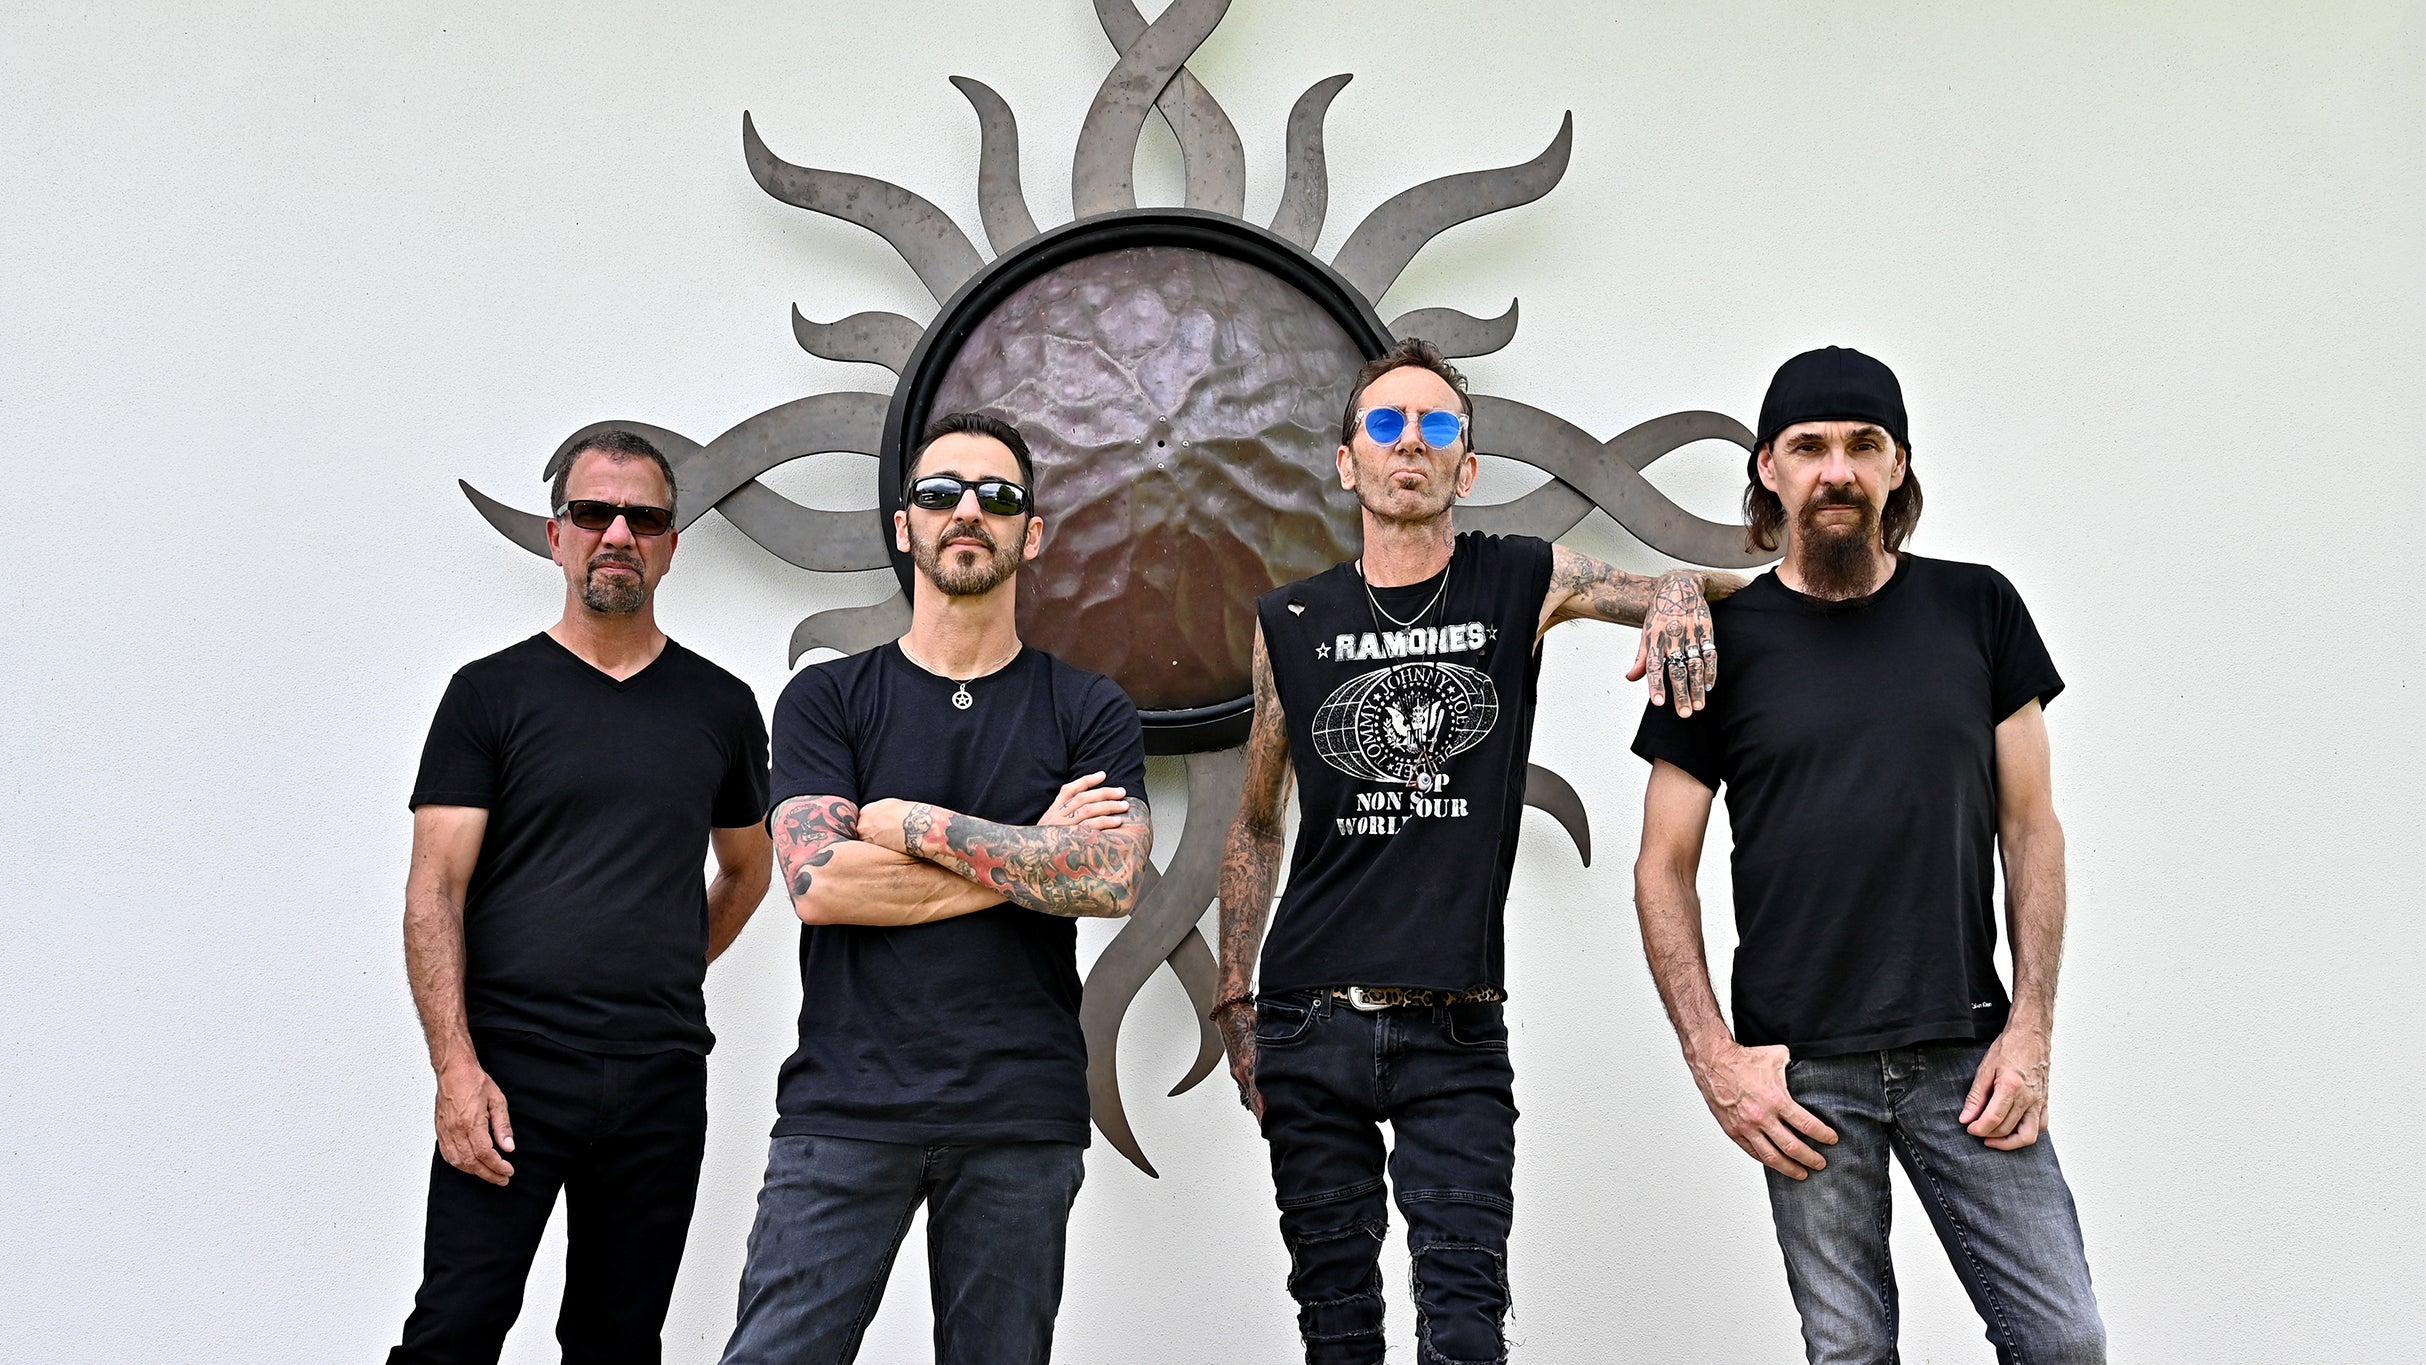 107.9 KBPI Presents: Vibez Tour - An Intimate Evening with Godsmack free presale password for early tickets in Denver